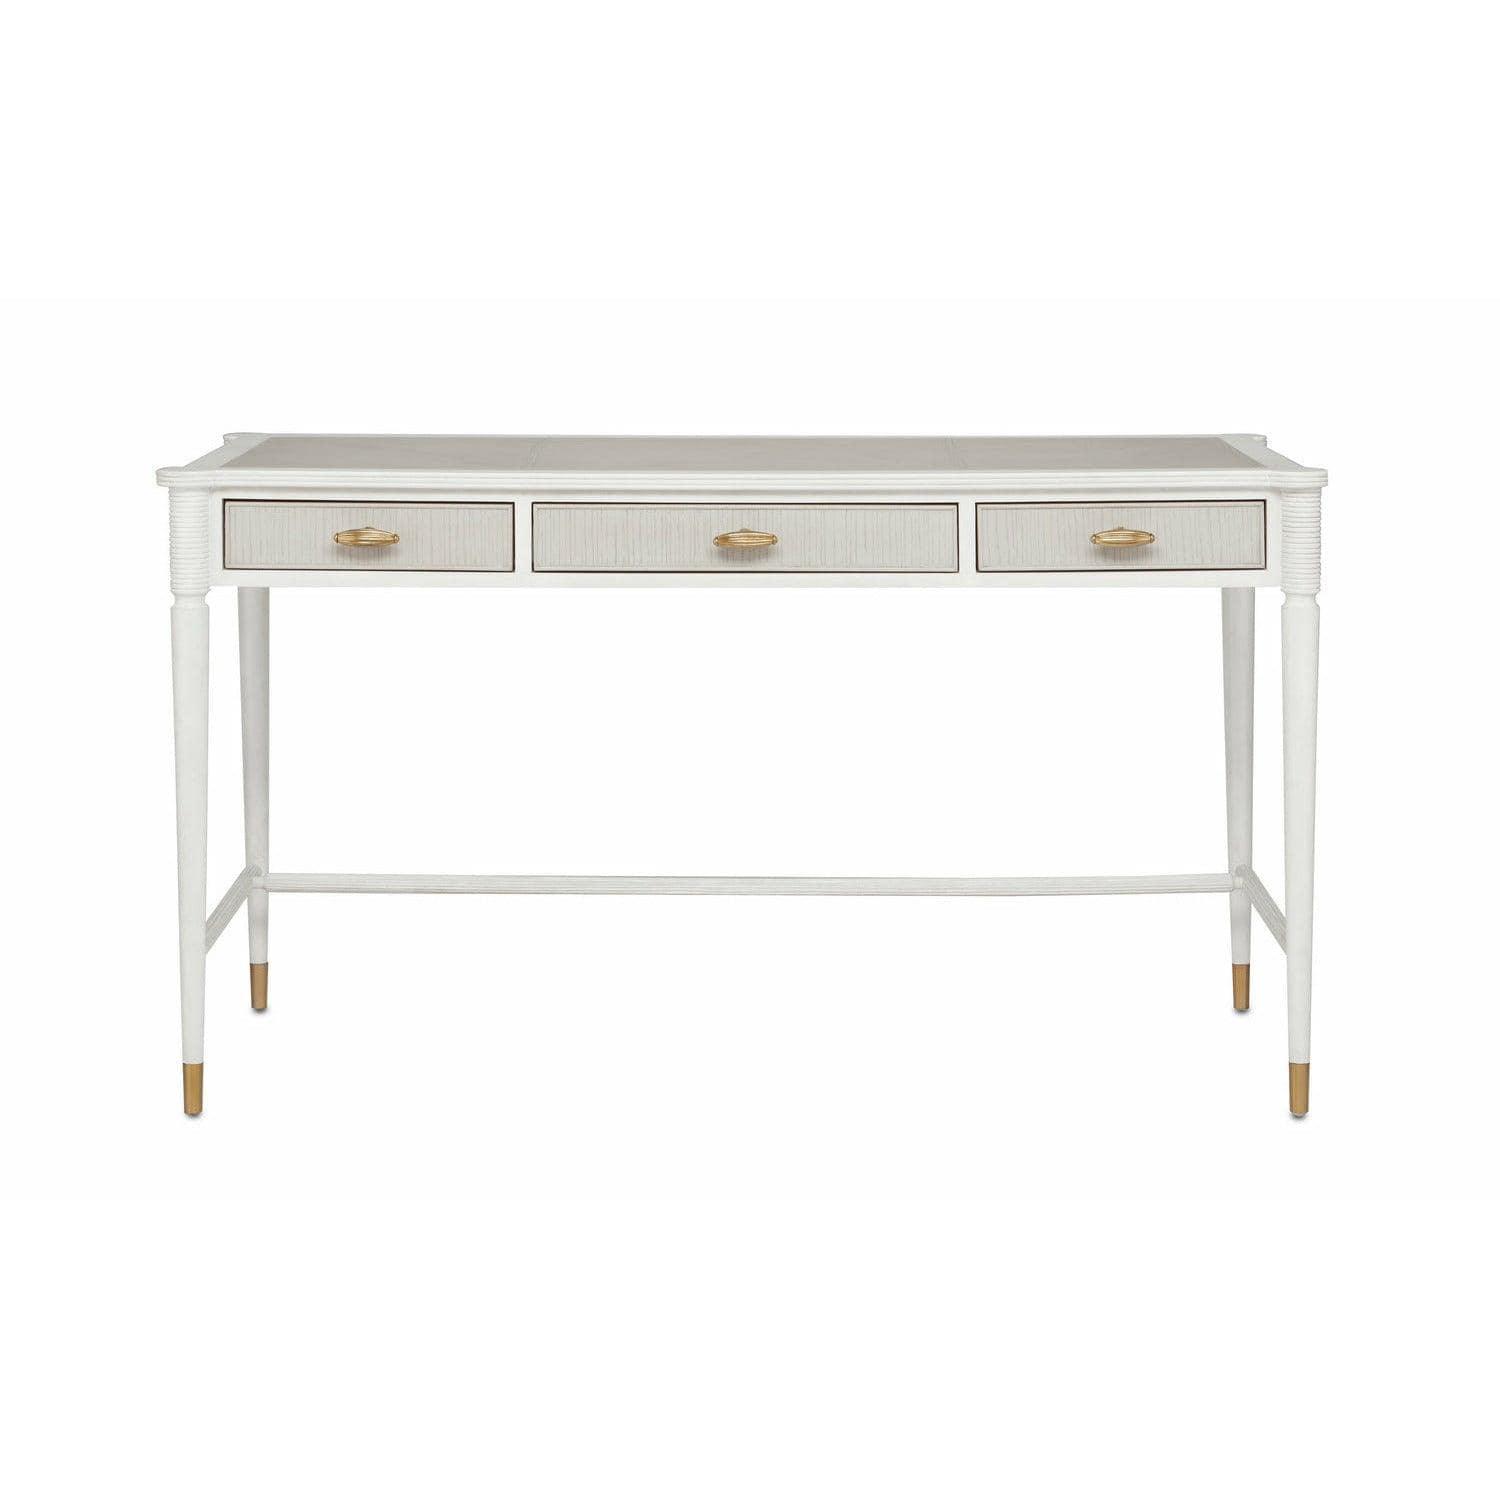 Currey and Company - Aster Desk - 3000-0190 | Montreal Lighting & Hardware